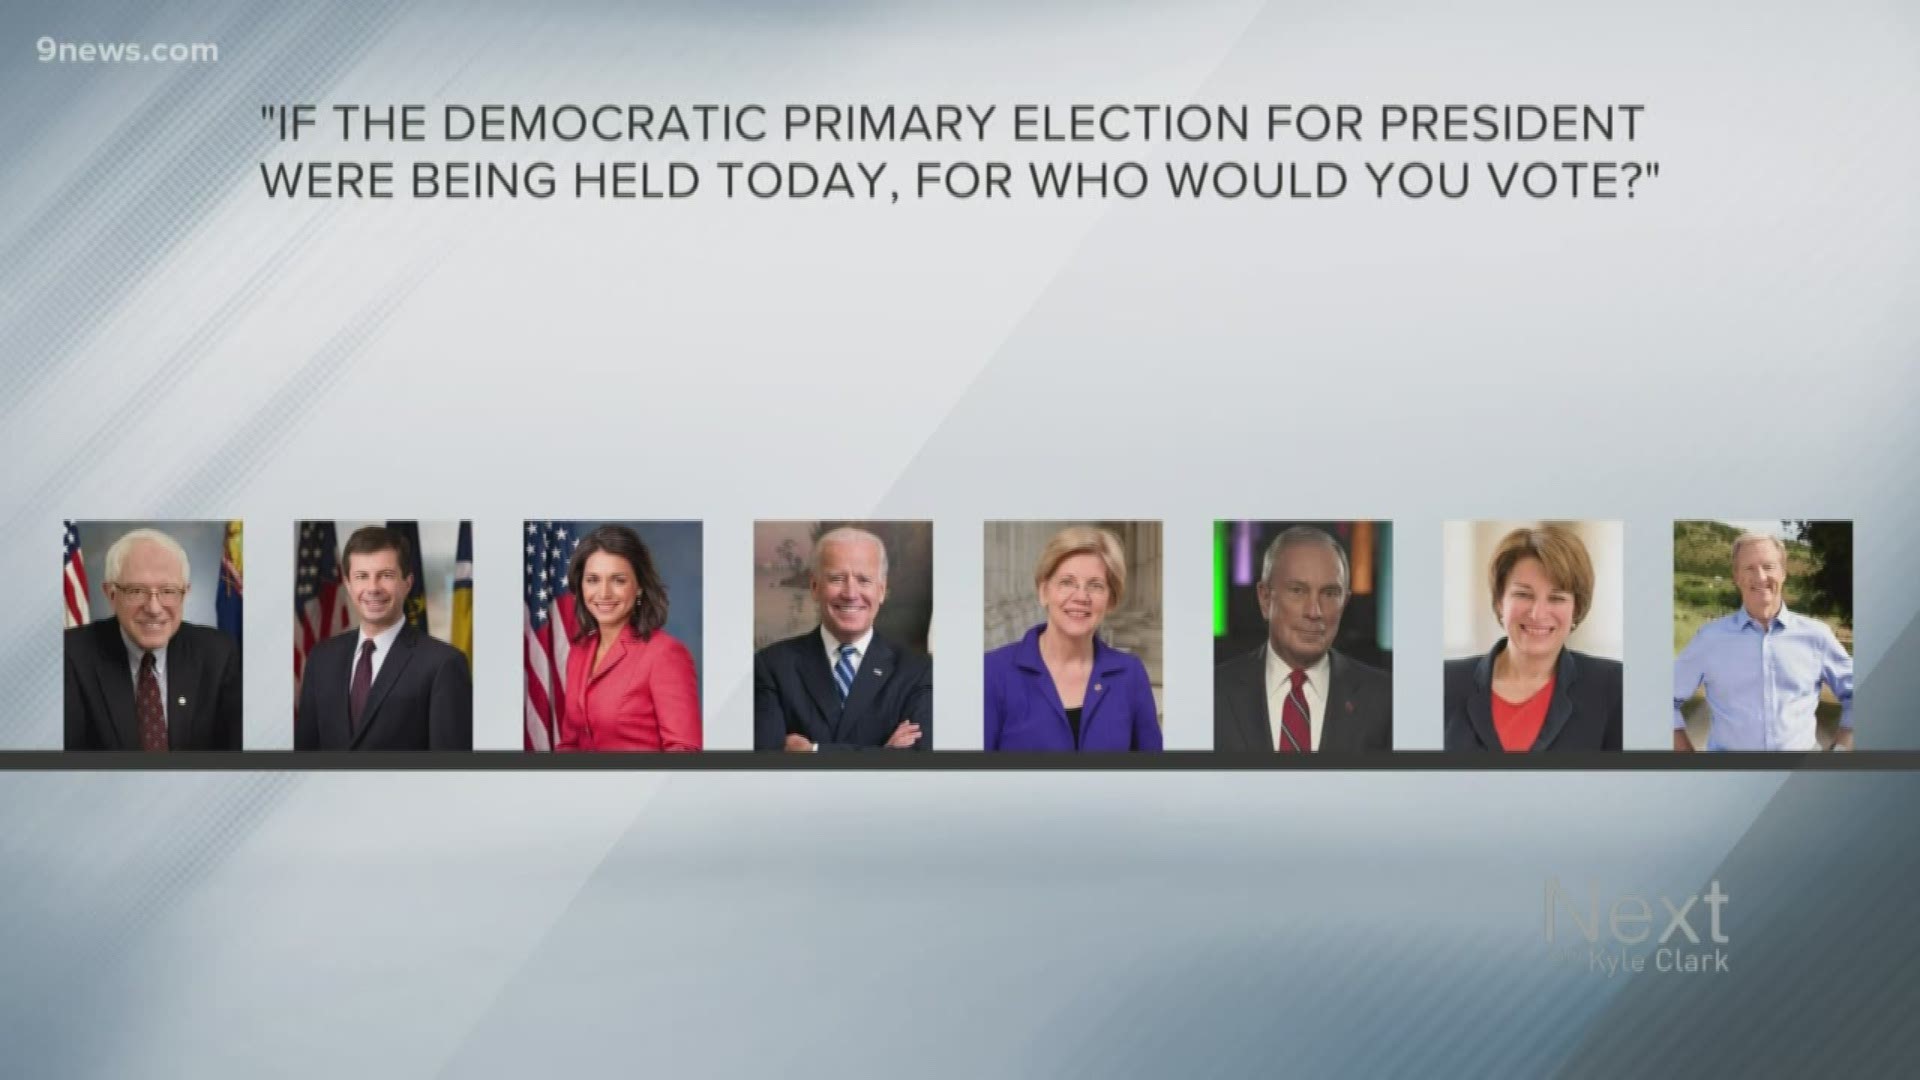 Magellan Strategies polled 500 people to determine who they would support in Colorado's Democratic primary.